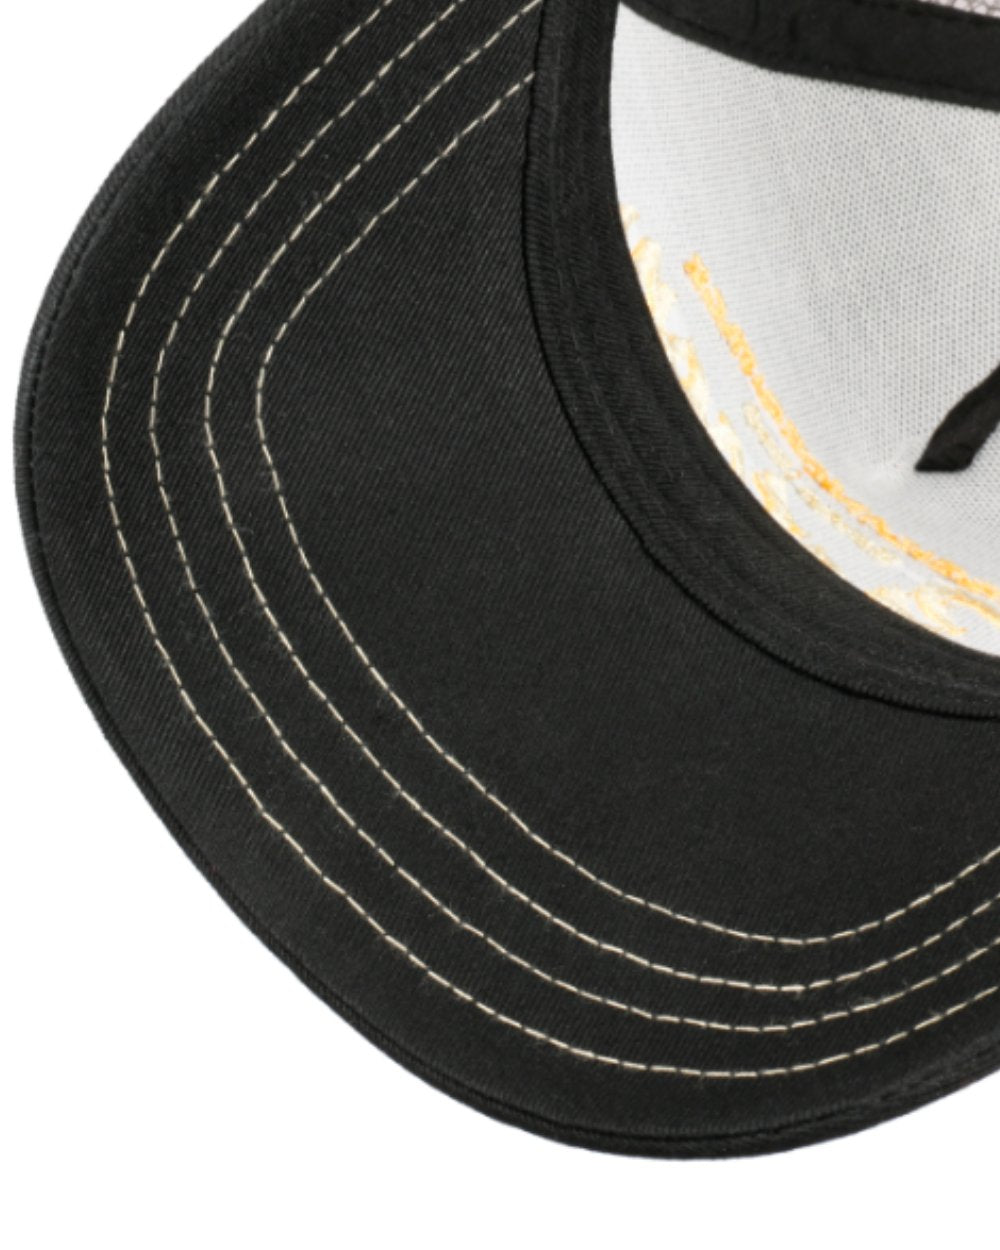 Classic Black coloured Stetson American Heritage Classic Trucker Cap on White background 